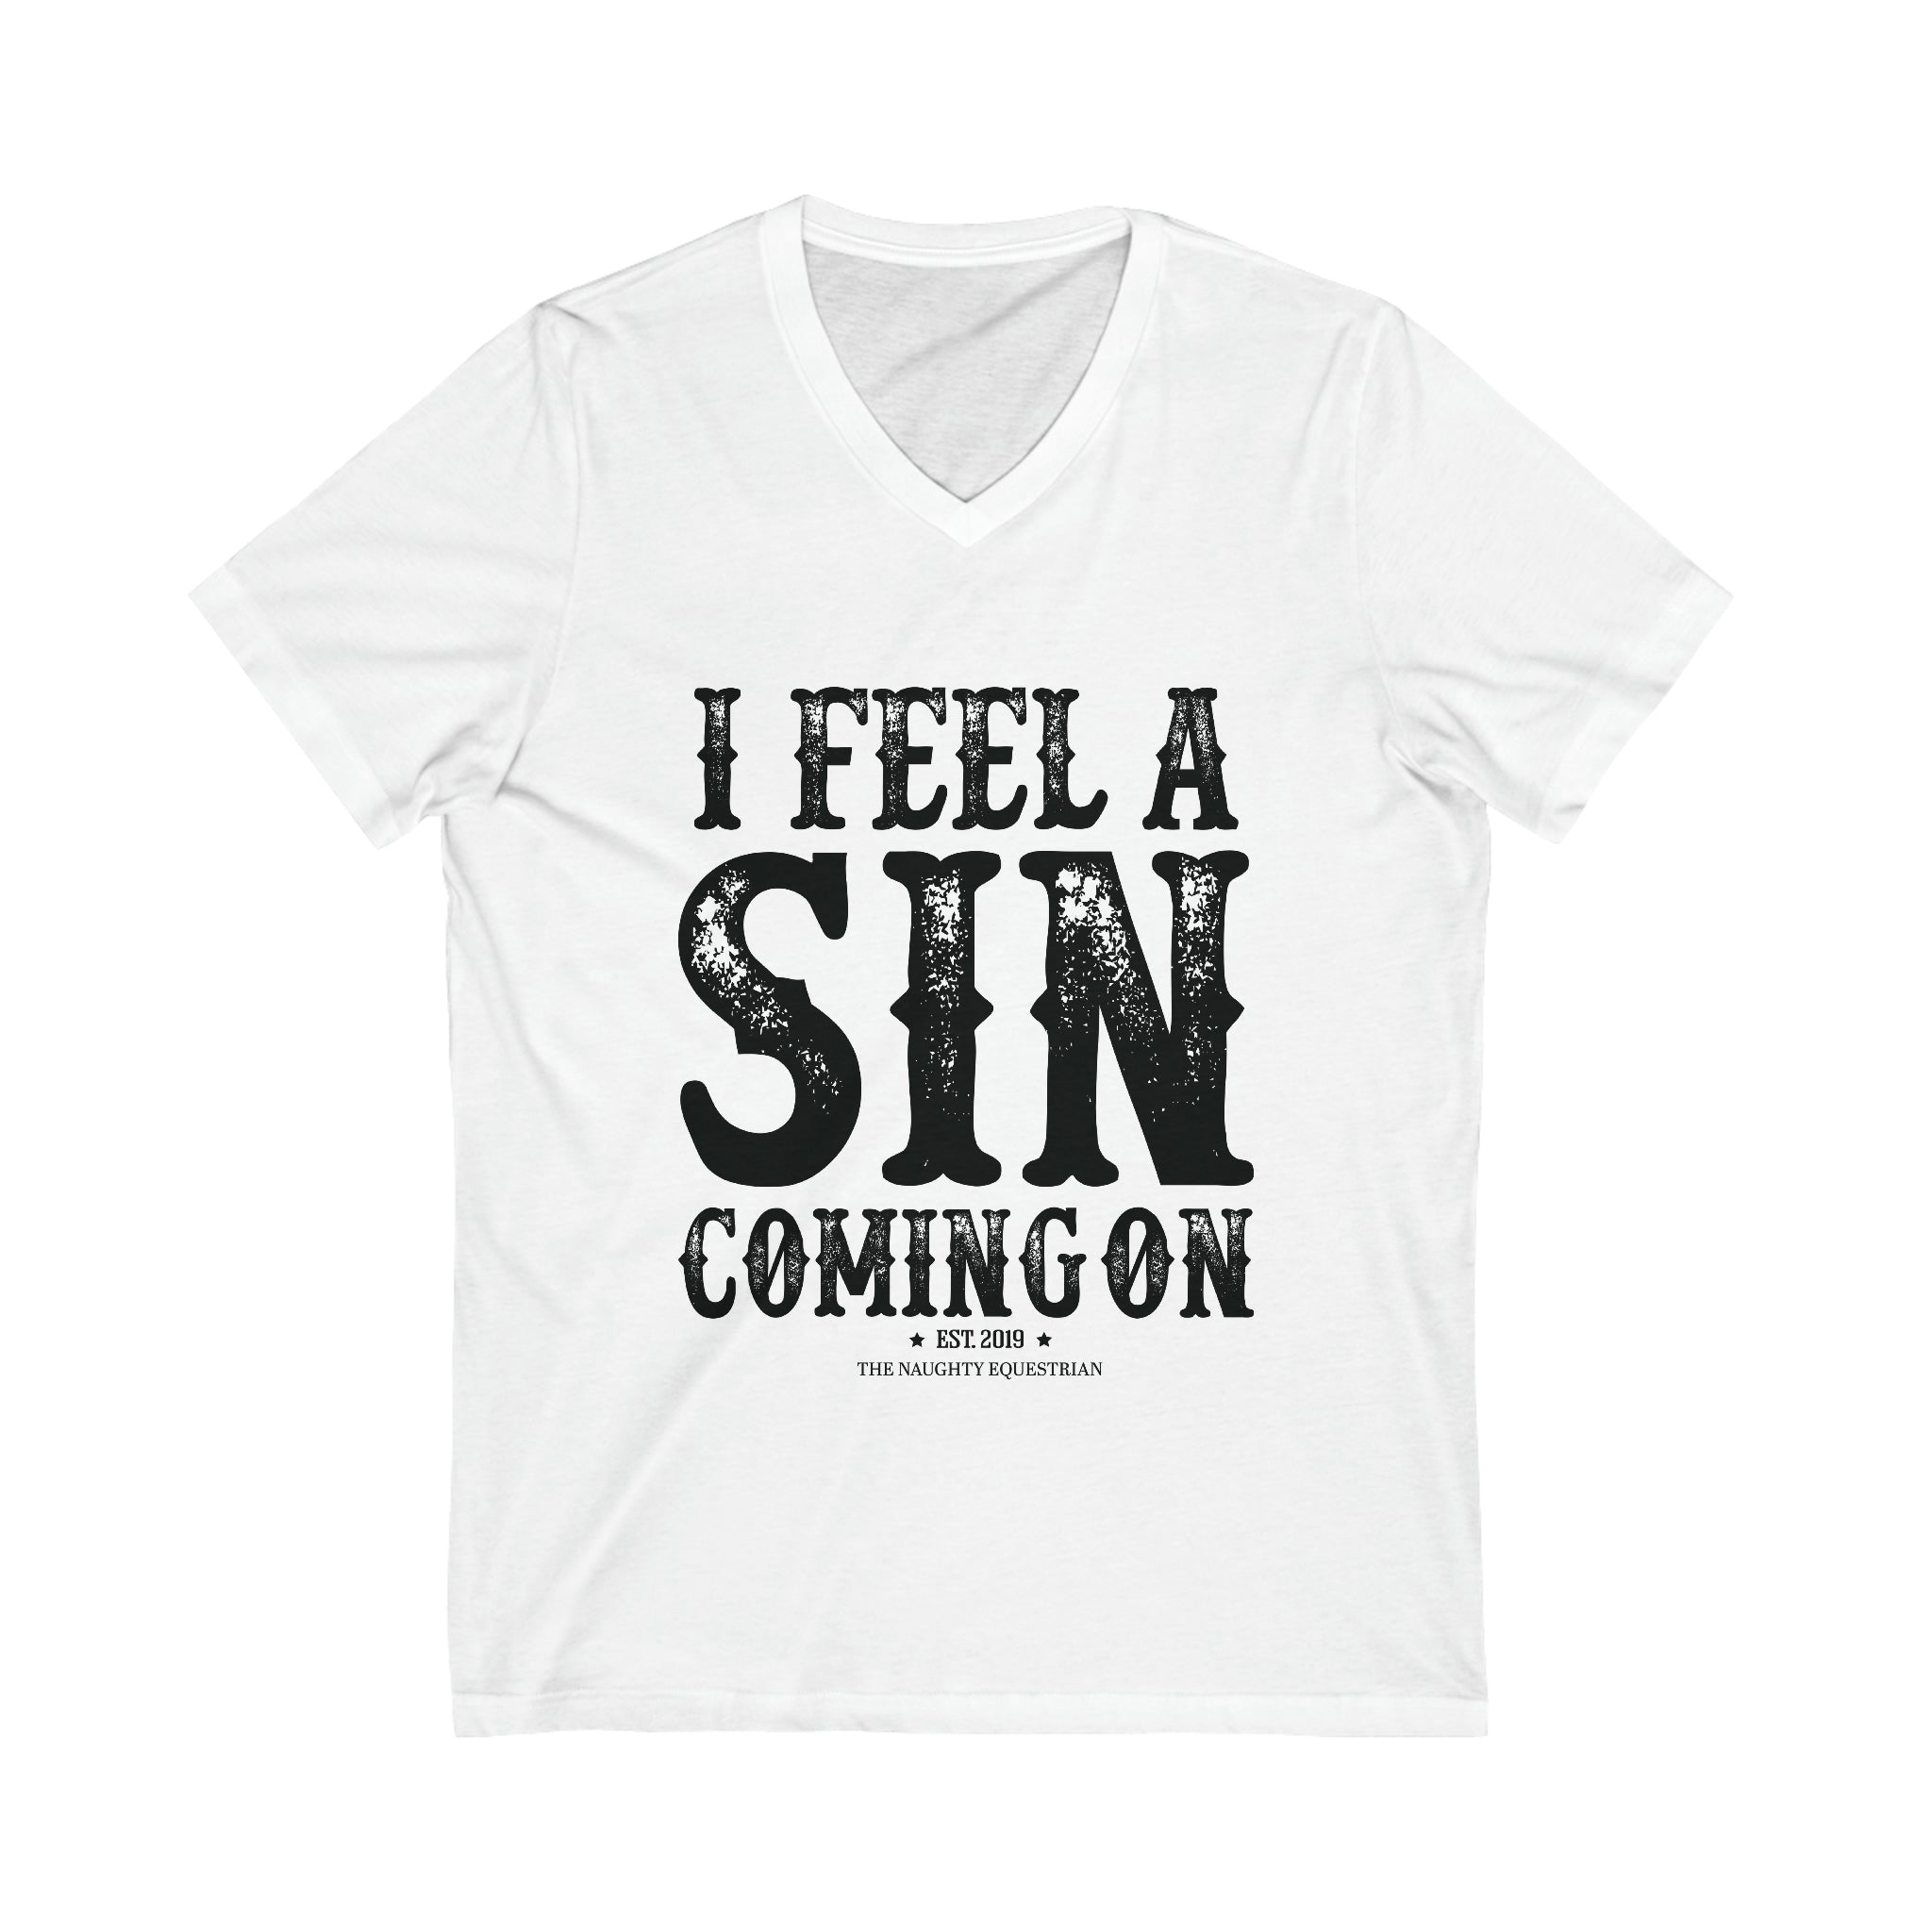 I Feel A Sin Coming On V-Neck Tee